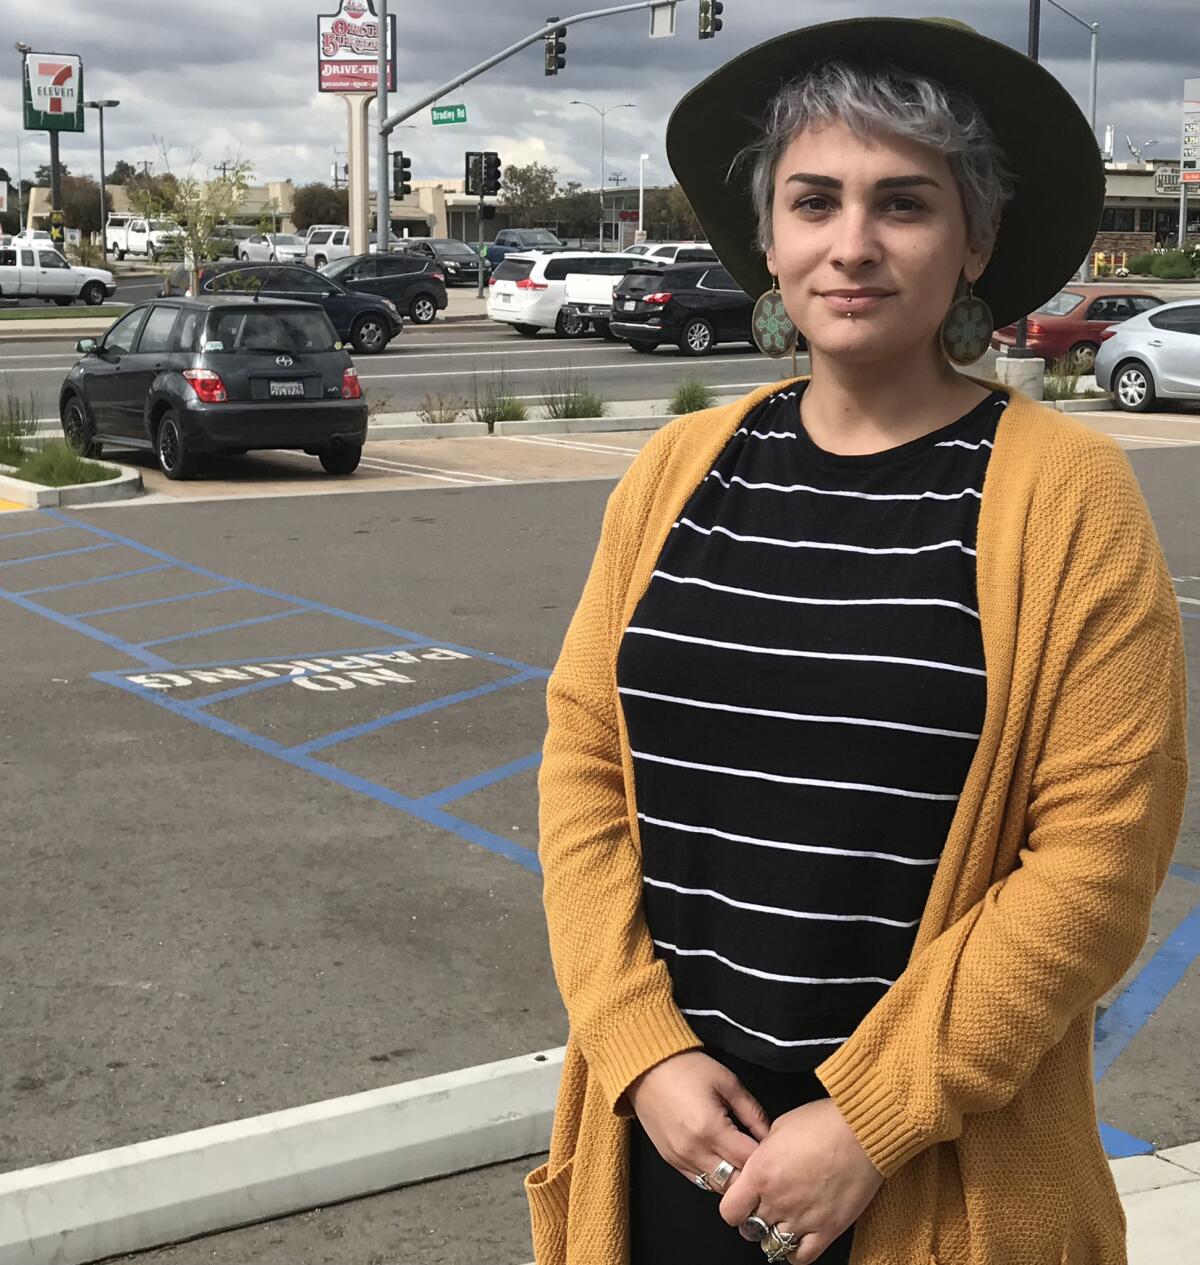 High school special education teacher Camille Chavez was assaulted in an Avila Beach bar three years ago. Her assailant pleaded guilty to a misdemeanor after a jury failed to convict him.